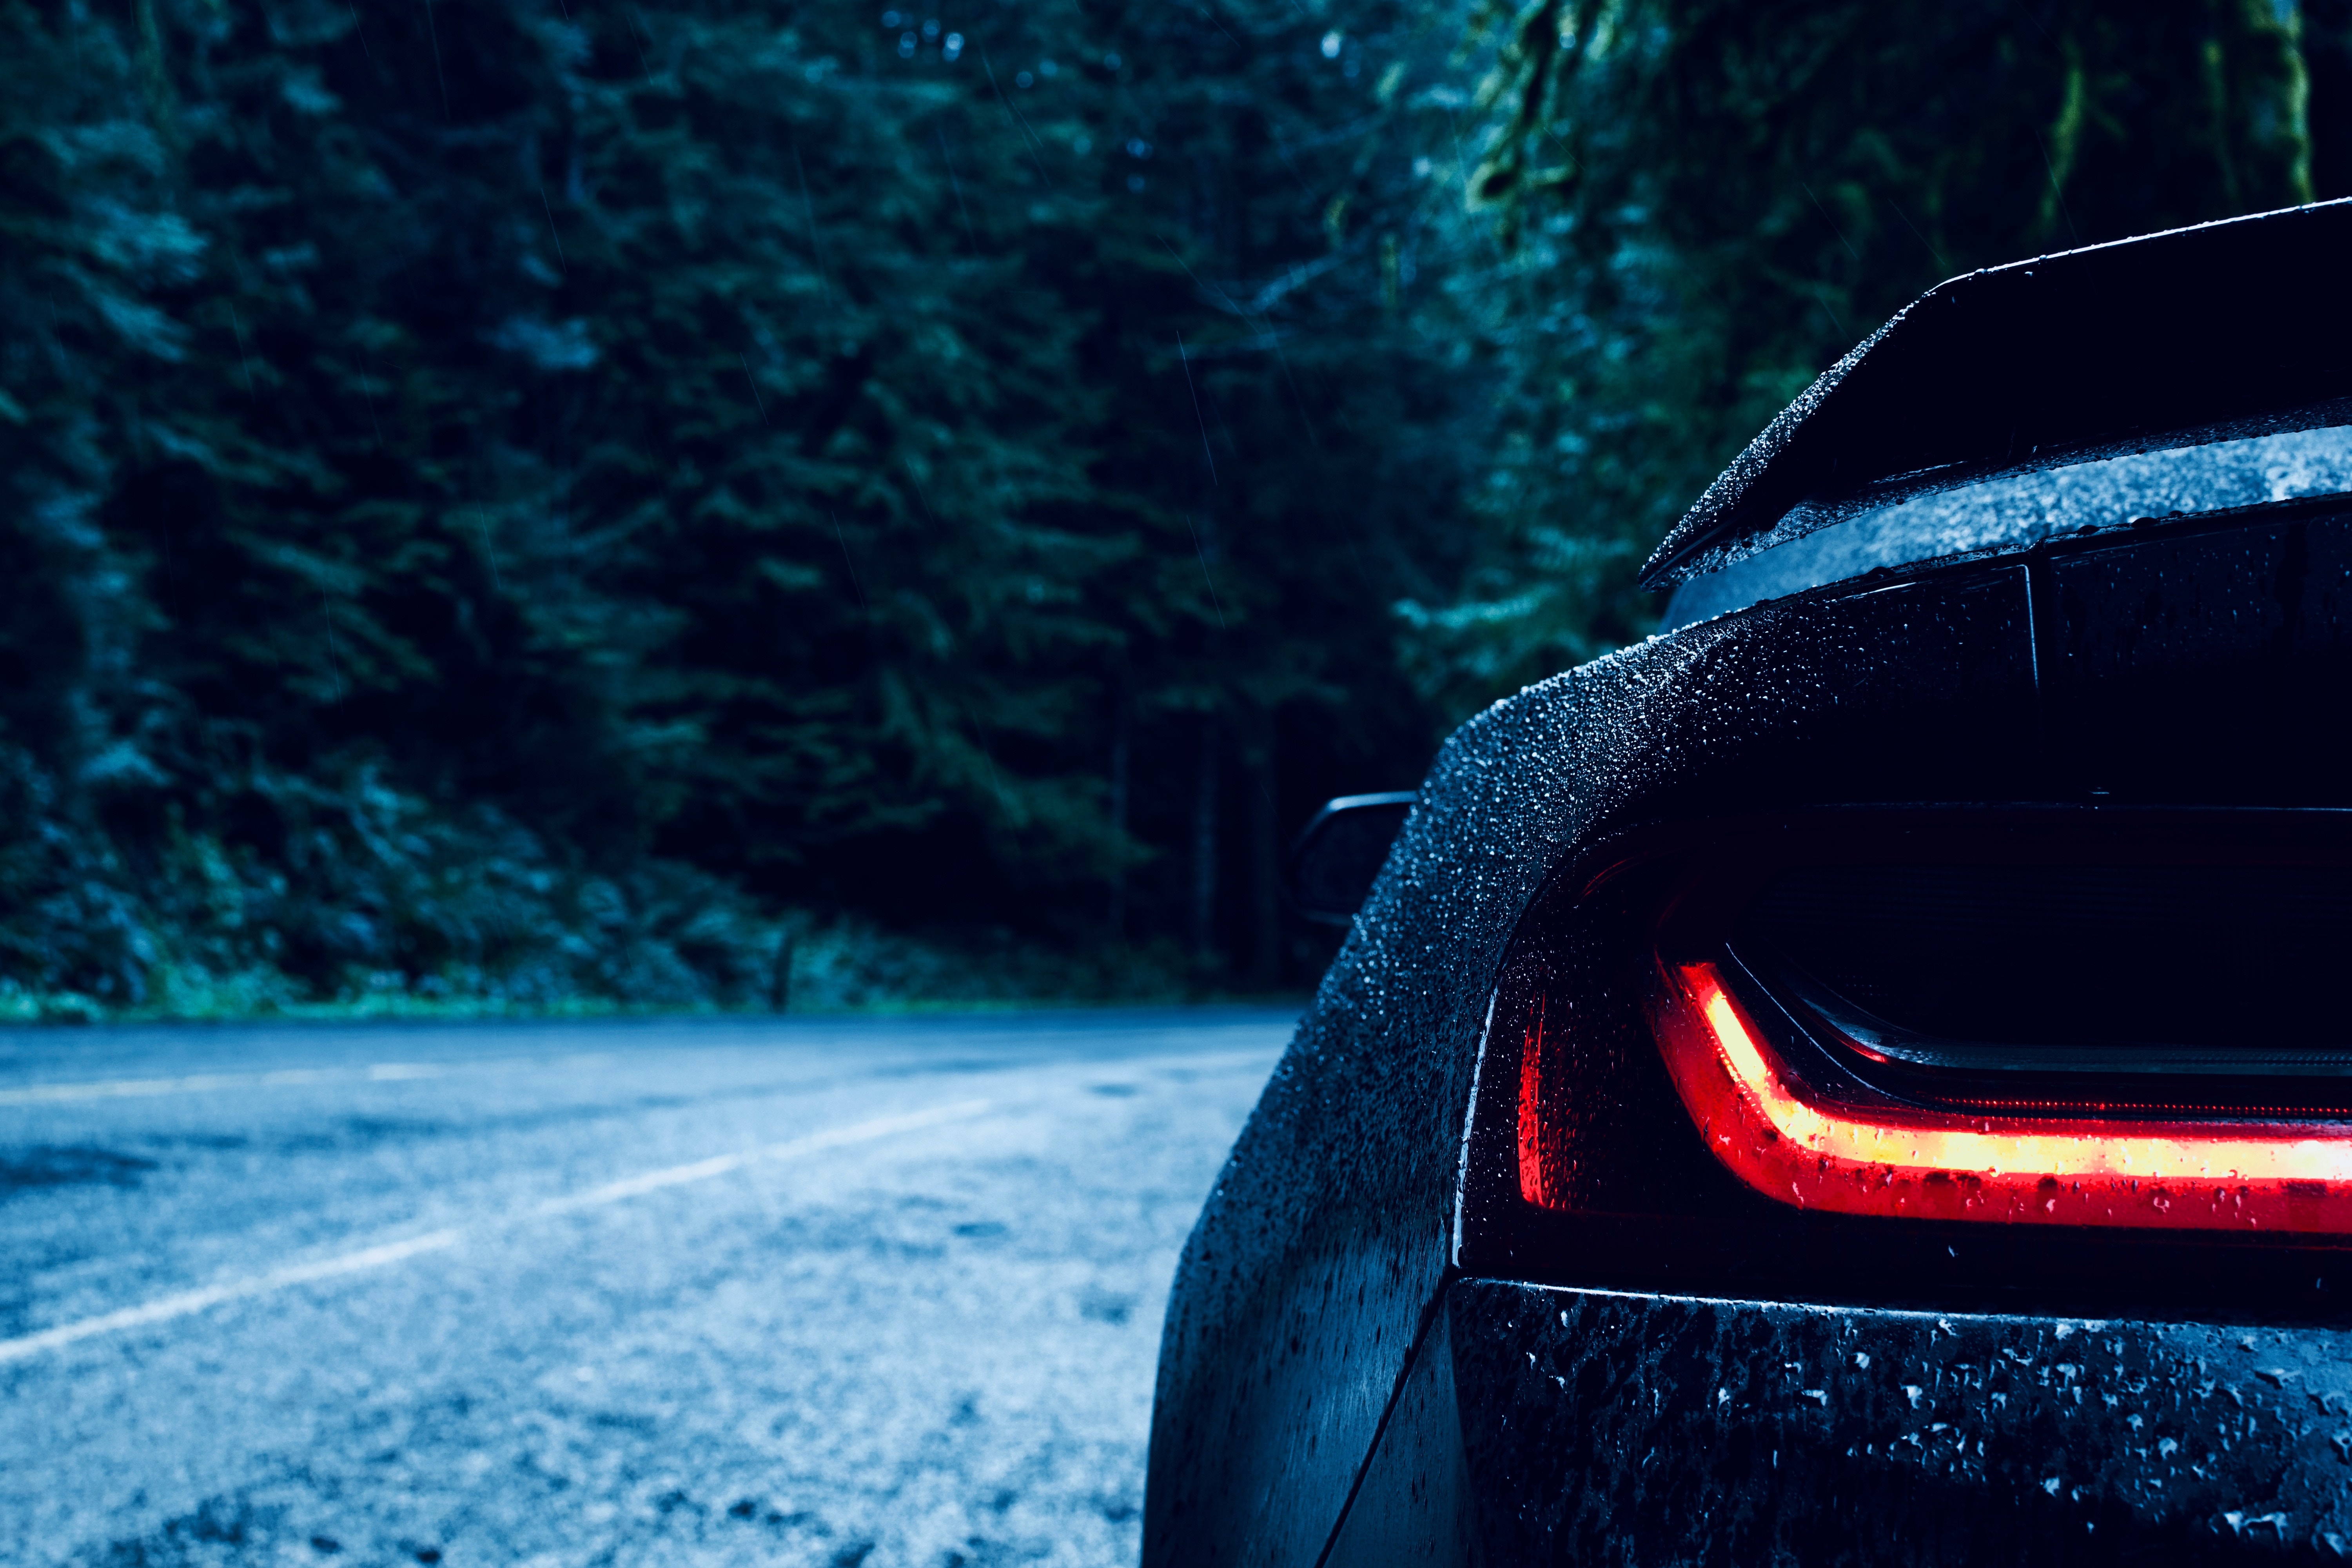 blur, smooth, auto, drops, cars, headlight wallpaper for mobile